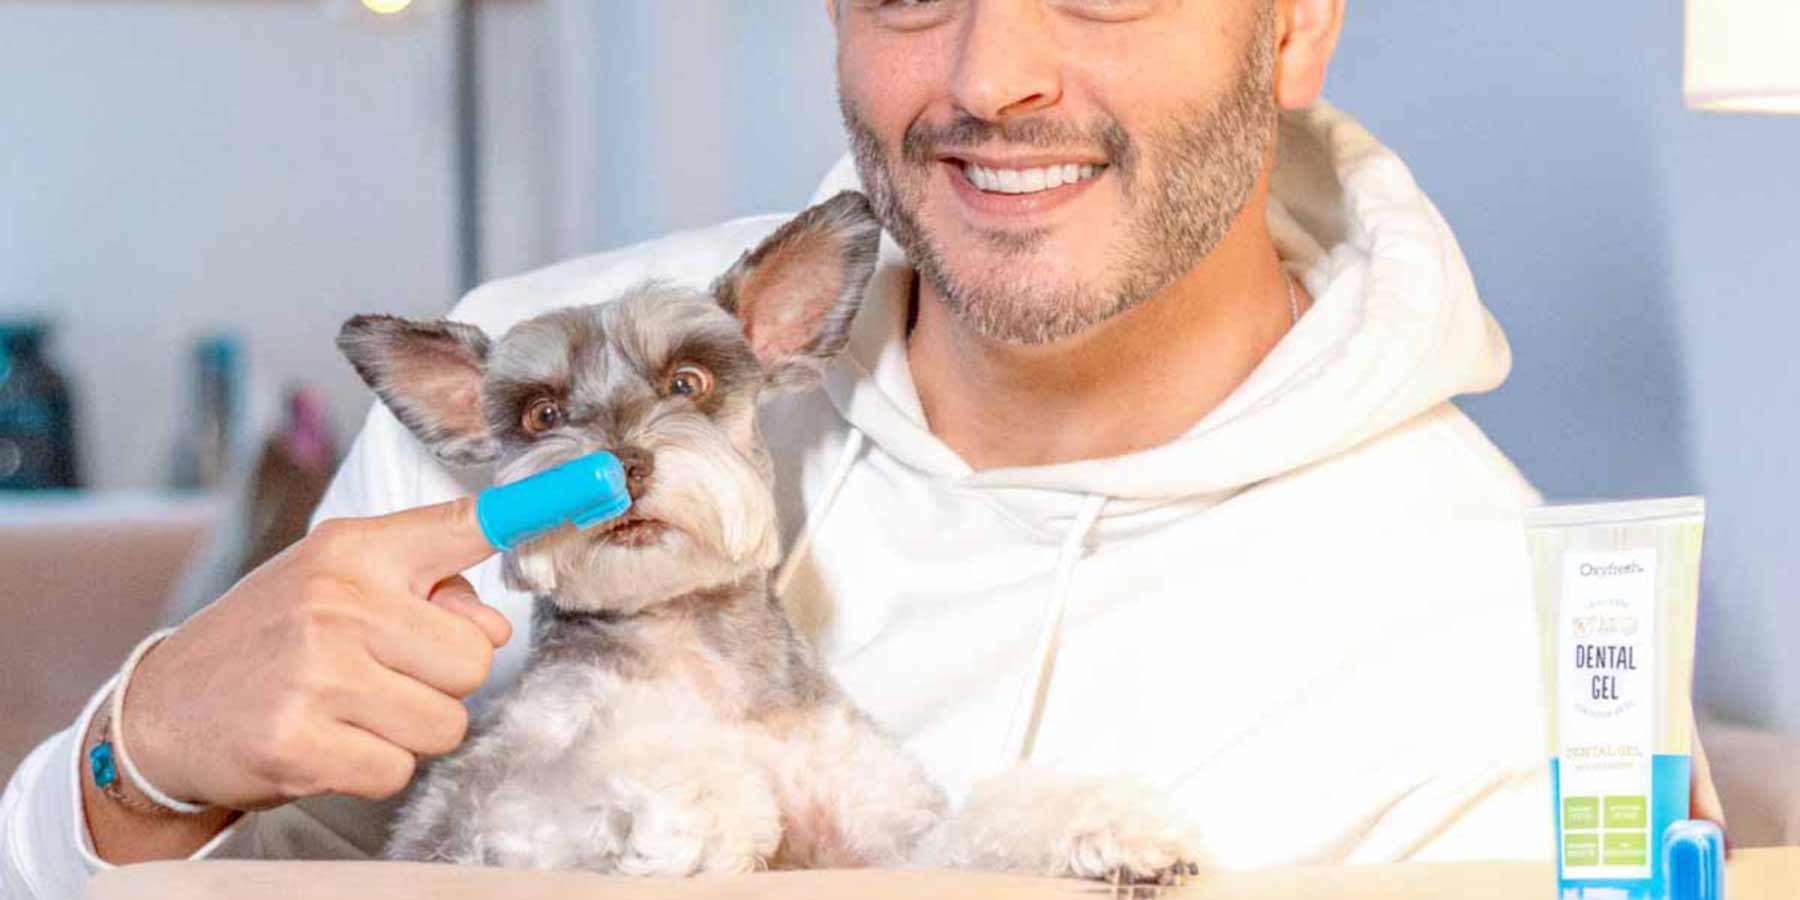 Social-Media-Post-From-Instagram-User-_vinniepotestivo-posing-with-his-shnauzer-who-is-looking-intently-at-the-oxyfresh-pet-toothpaste-gel-to-clean-his-teeth-and-eliminate-dog-bad-breath